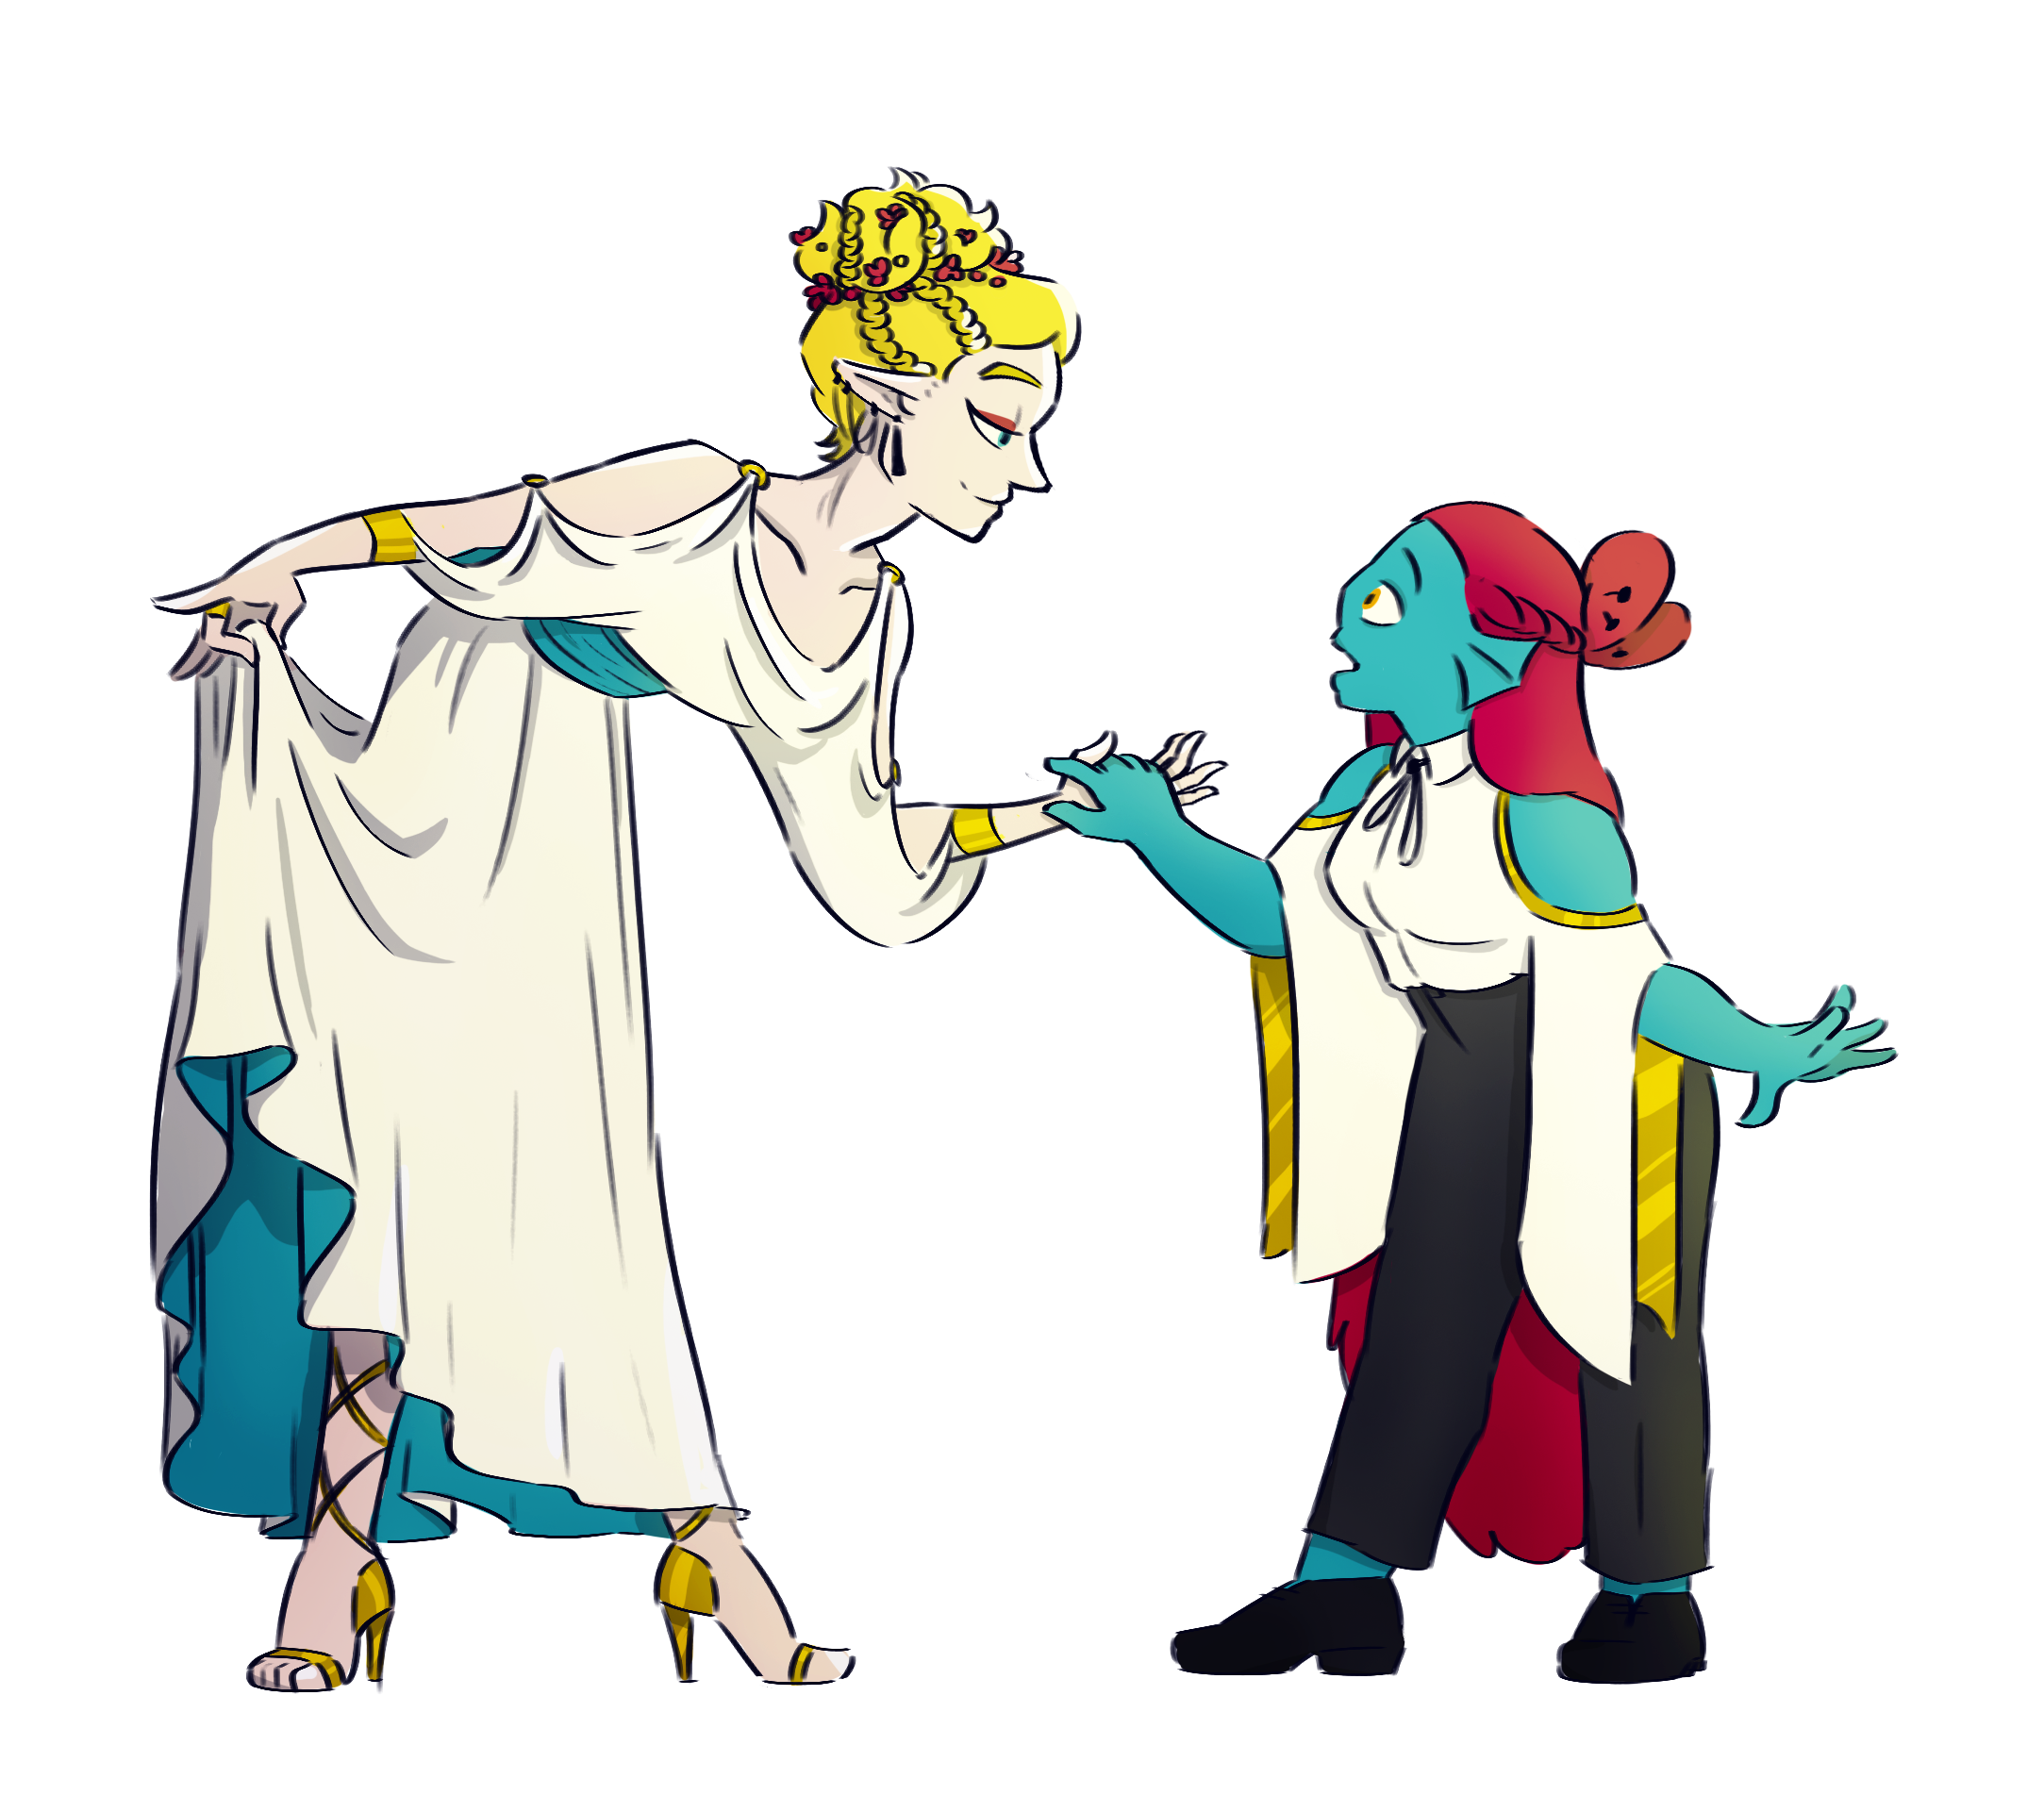 Costume exploration for formal event in story <br> As a couple, their colours were structured to be complementary